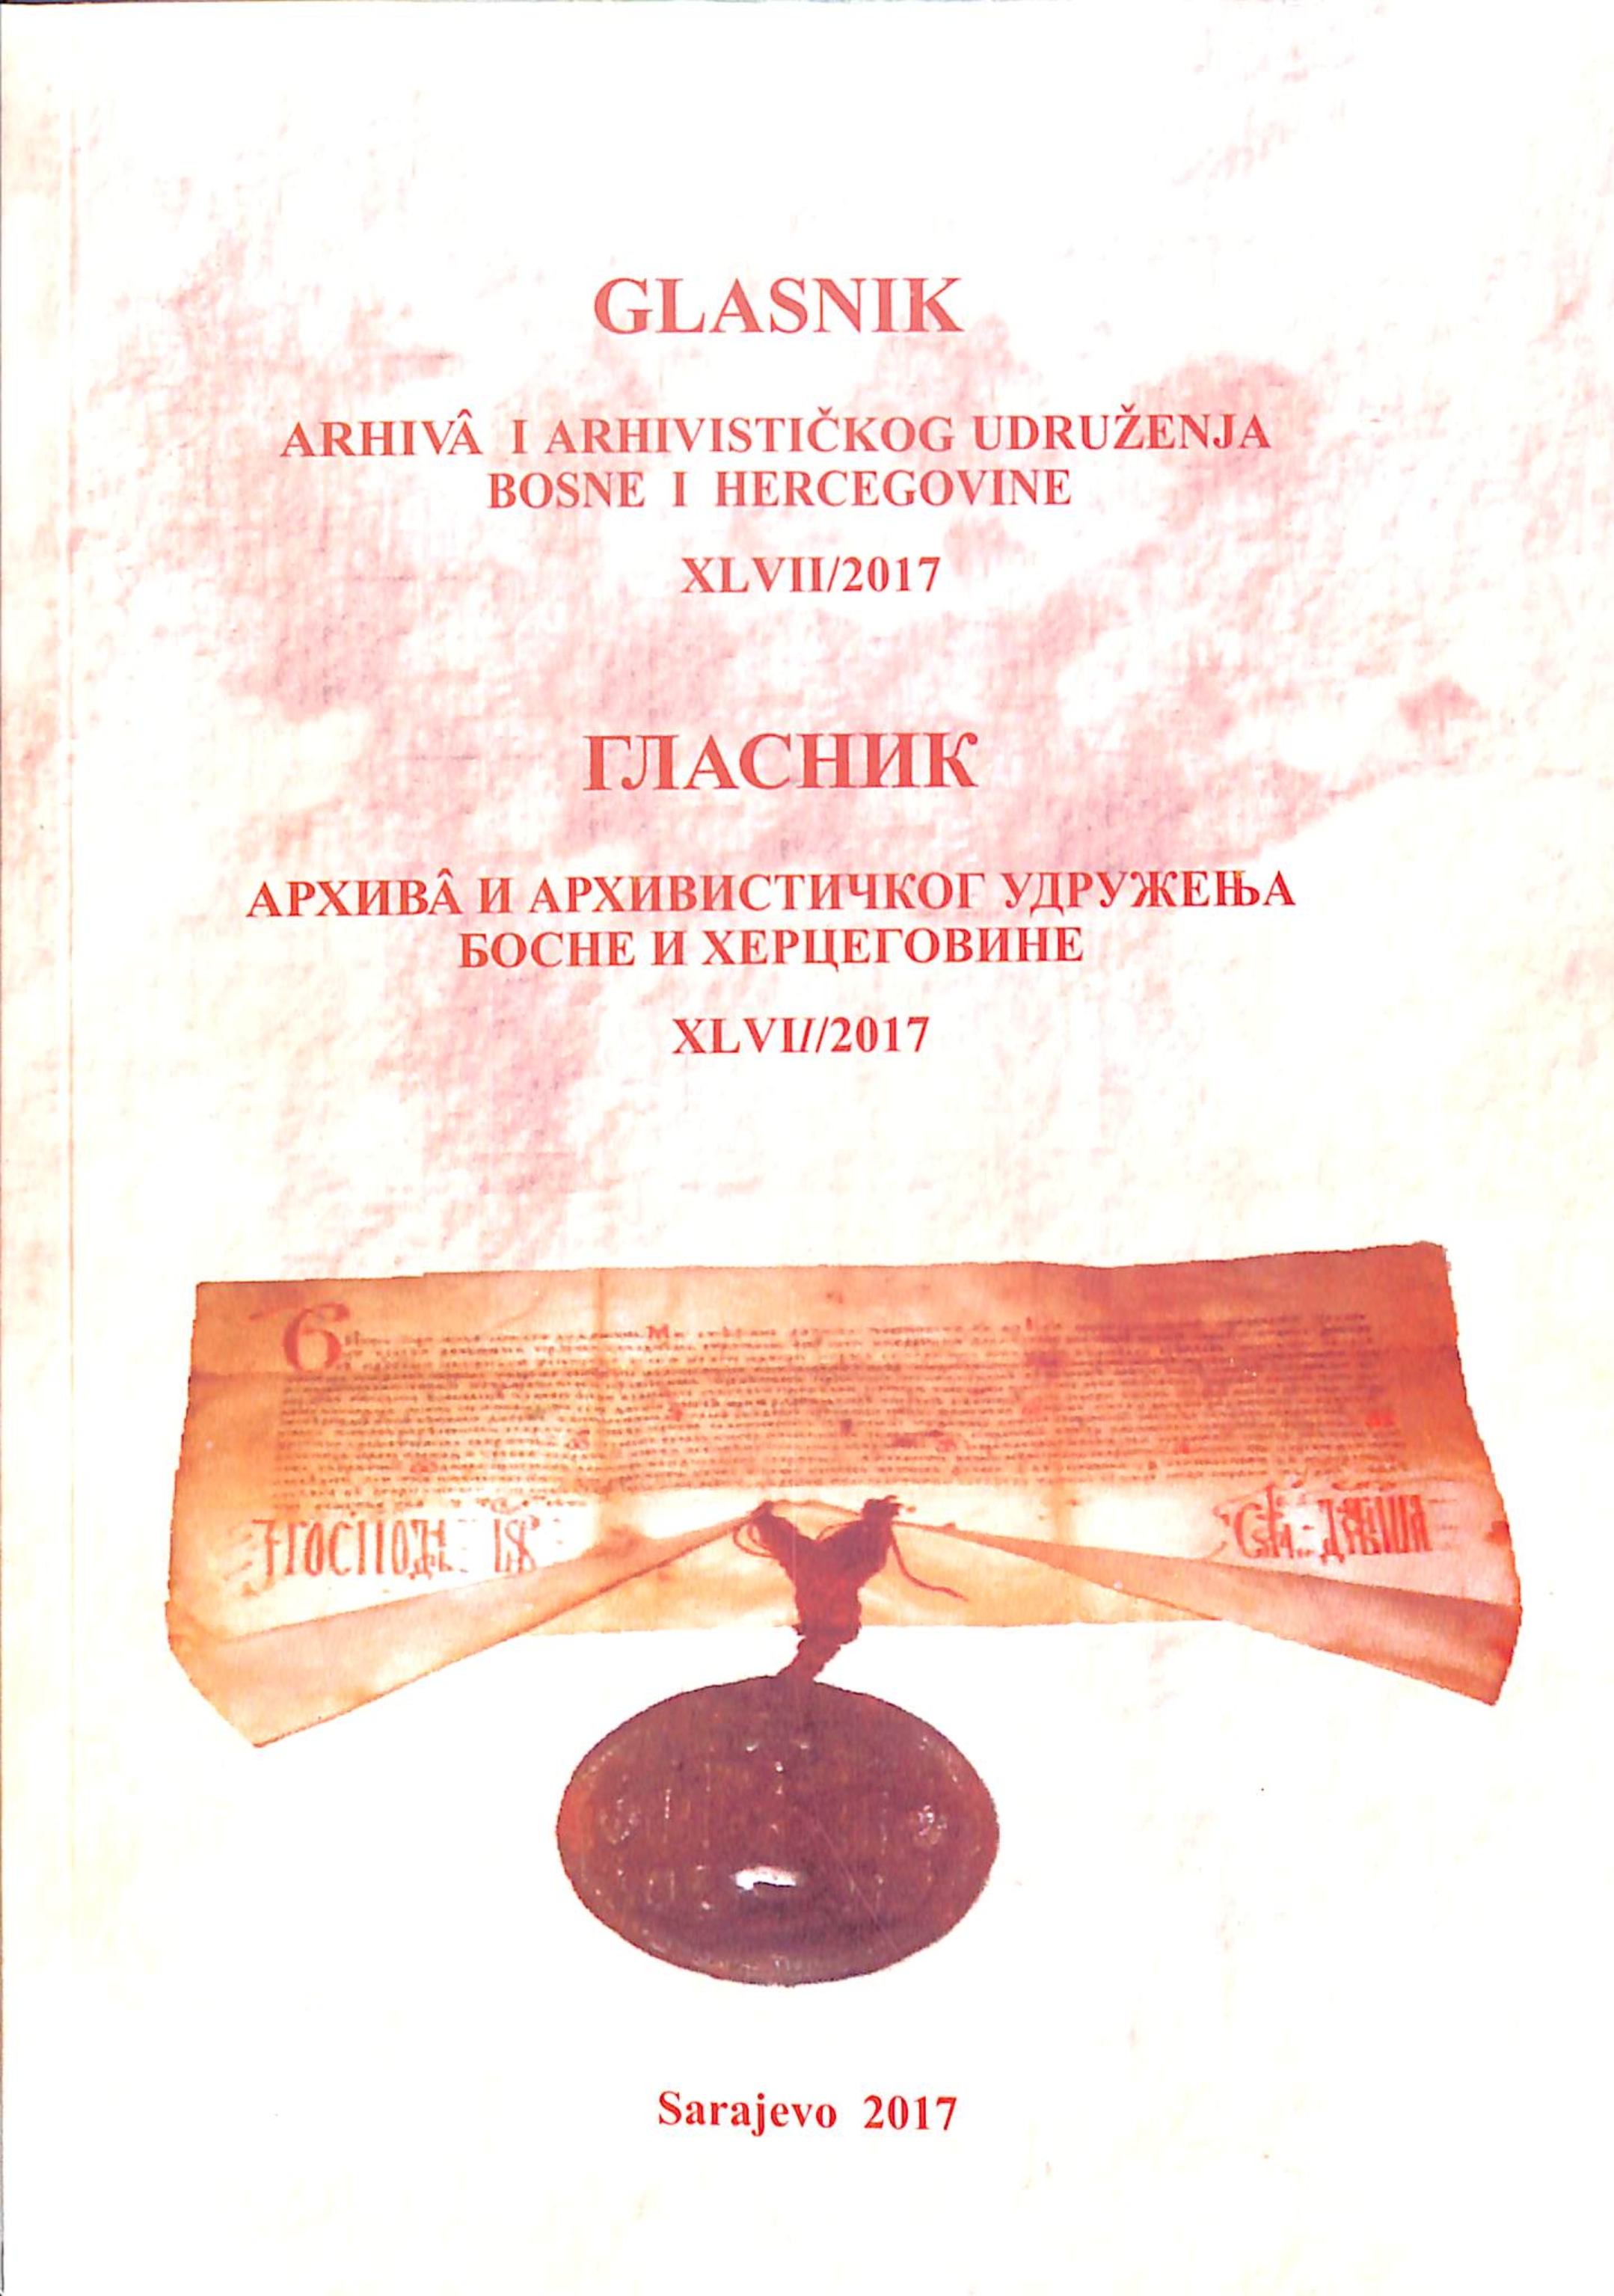 THE ARCHIVAL RECORDS OF THE SOCIALIST PERIOD - THE STATE, PROTECTION AND USE NATIONAL COMMITTEE OF THE VRANJE REGION-VRANJE 1944–1955. Cover Image